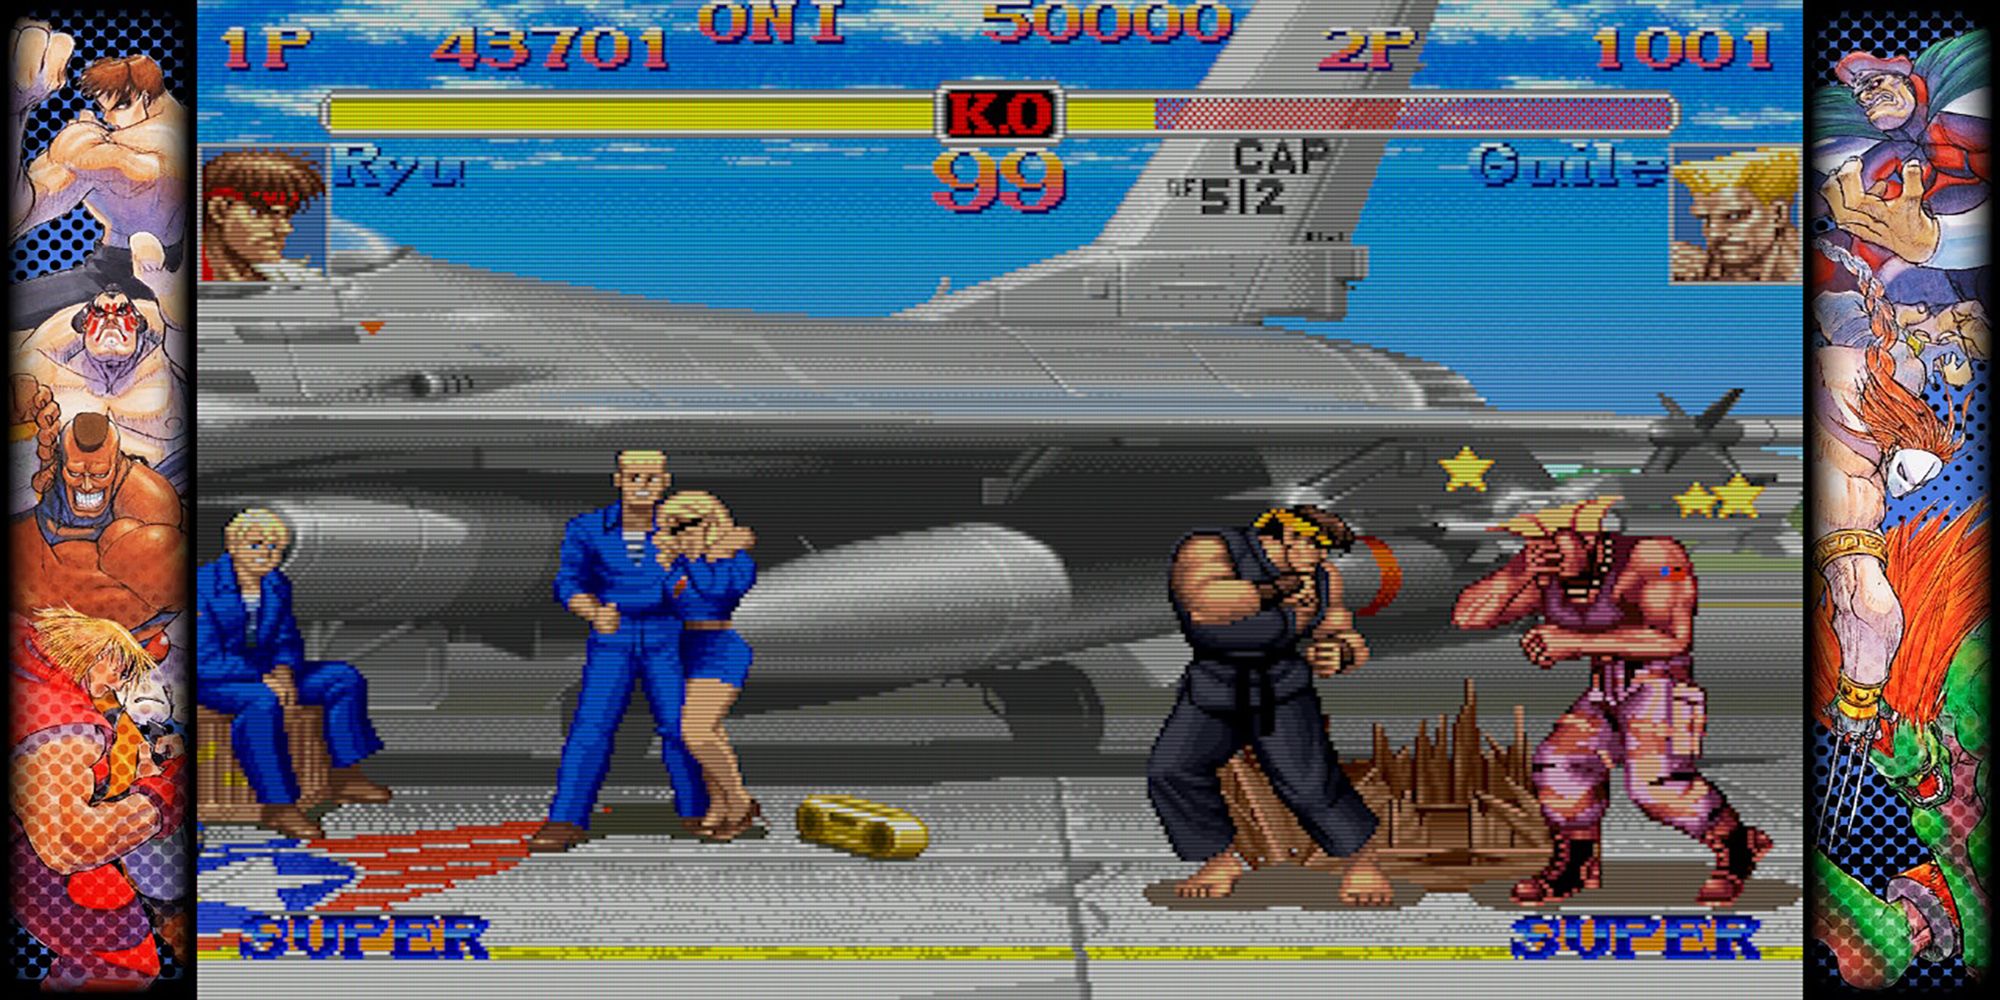 Ryu Stuns Guile during a battle at an air force base in Hyper Street Fighter 2, a game in Capcom Fighting Collection.